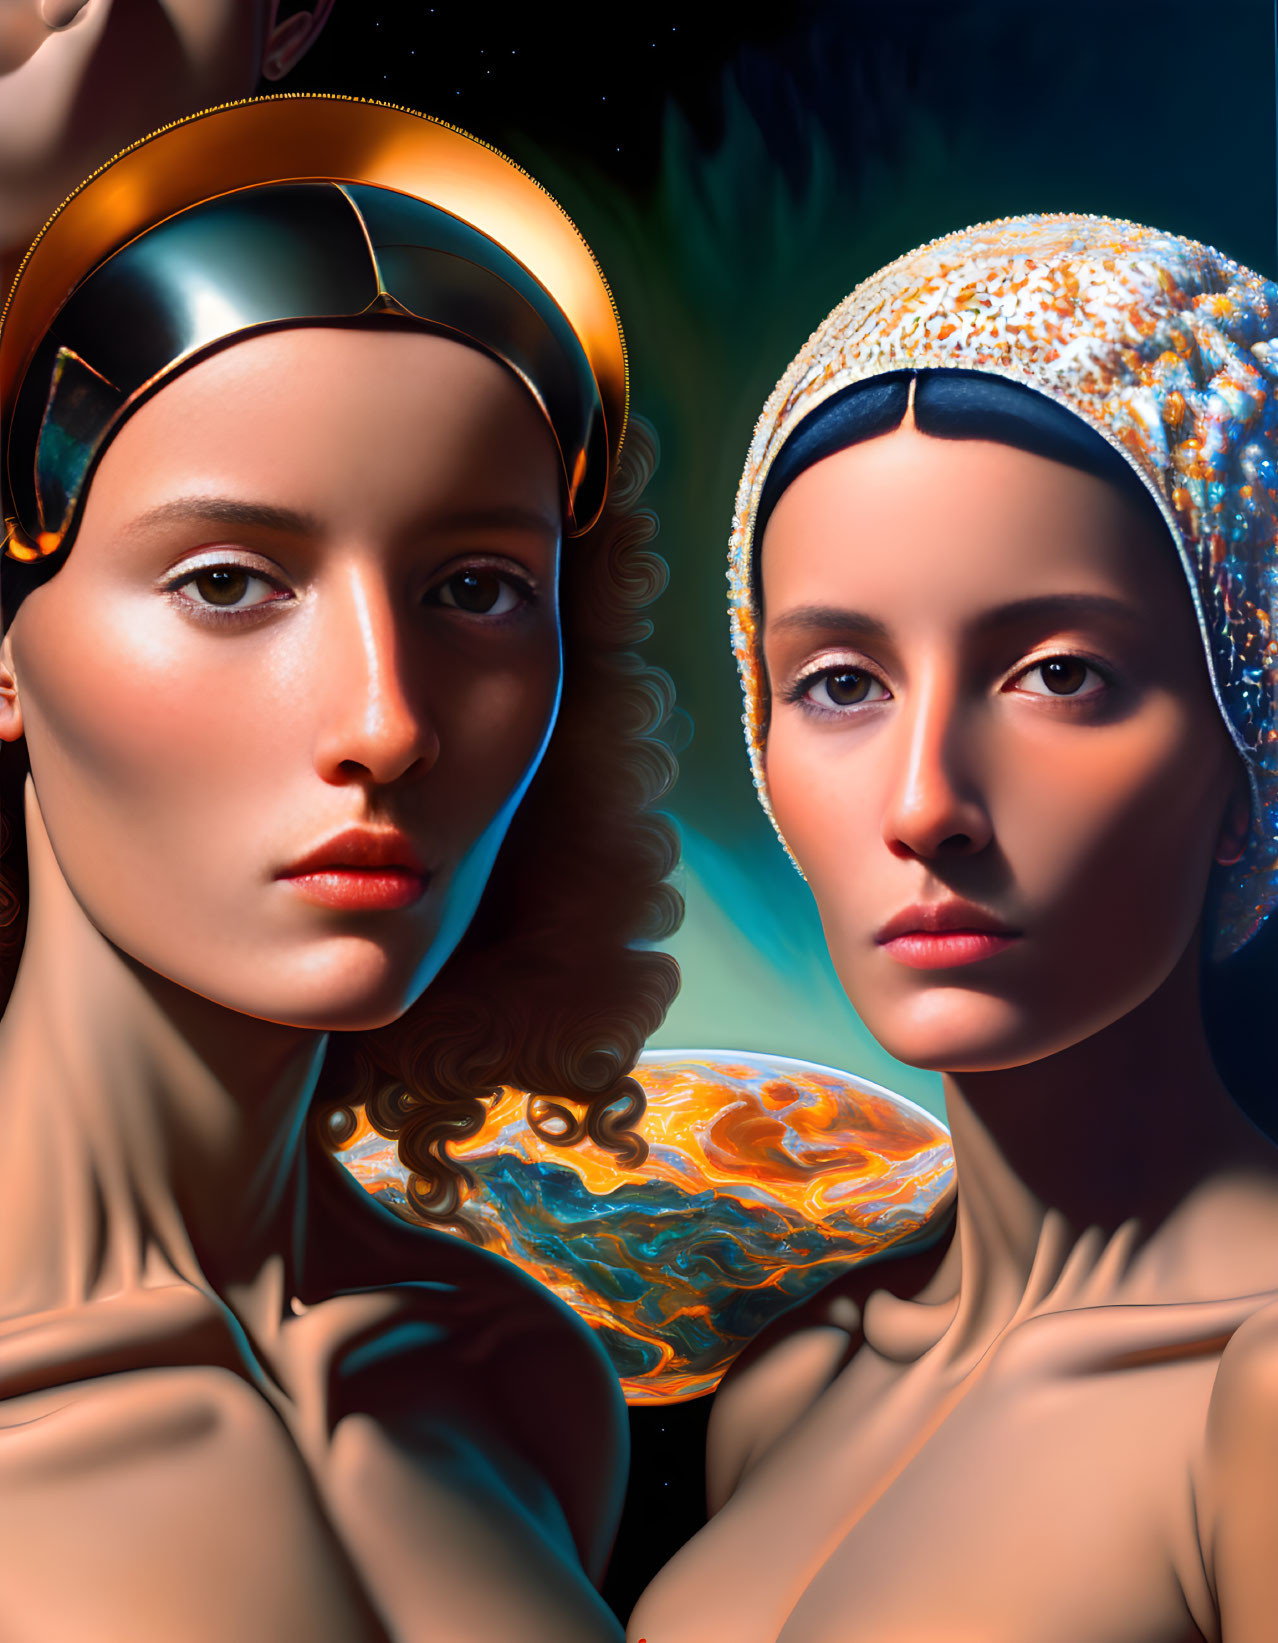 Stylized portraits of women with futuristic headgear and cosmic background